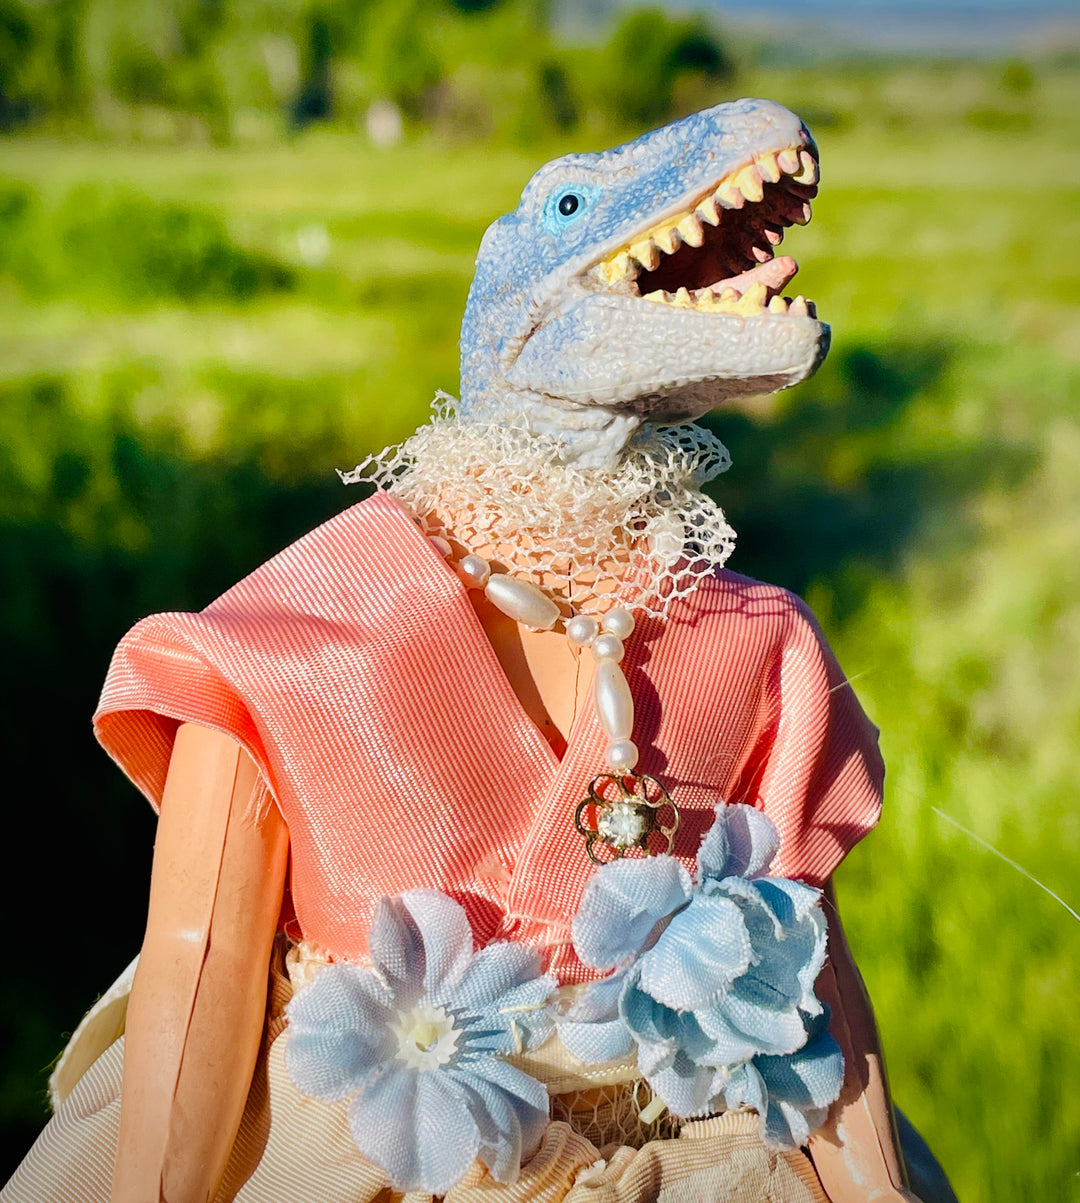 Vintage toy dinosaur in handpainted, beaded dress and beaded necklace, flower waistline